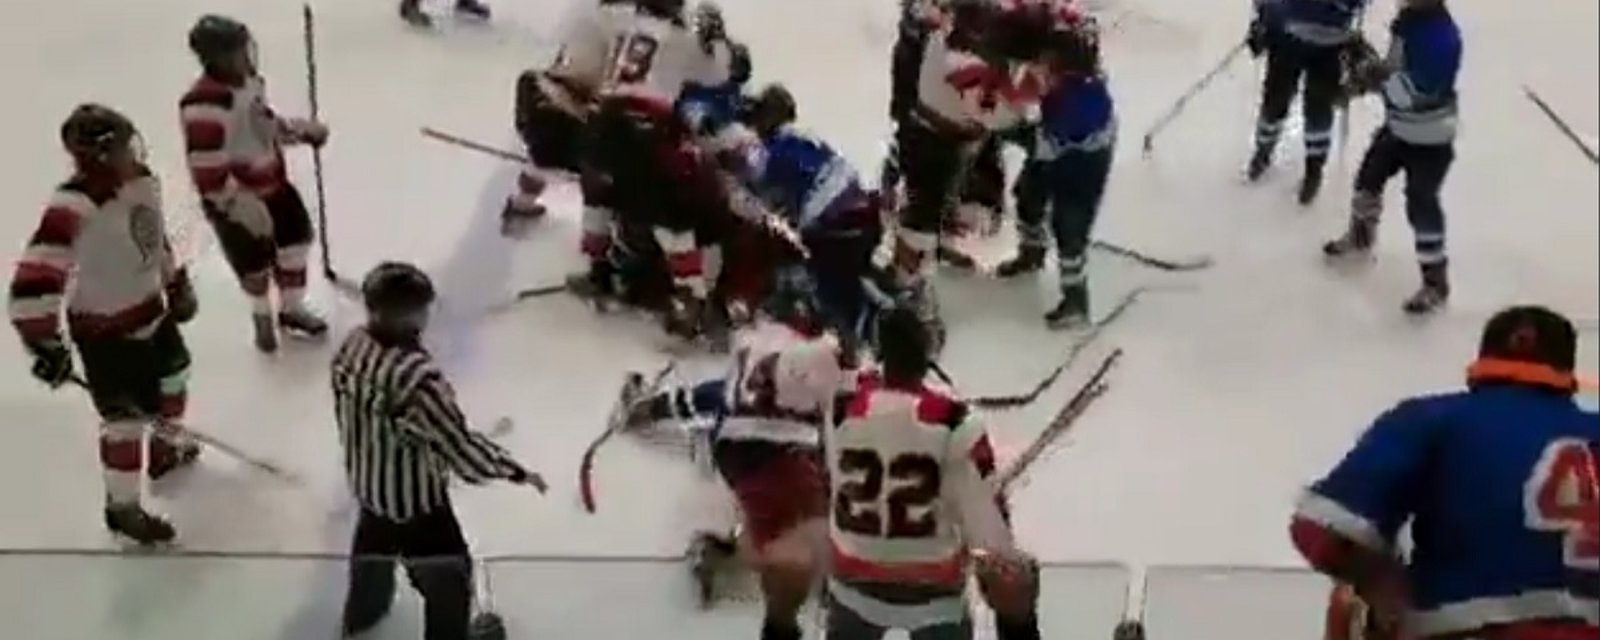 Police get involved after insane youth hockey brawl goes way too far.